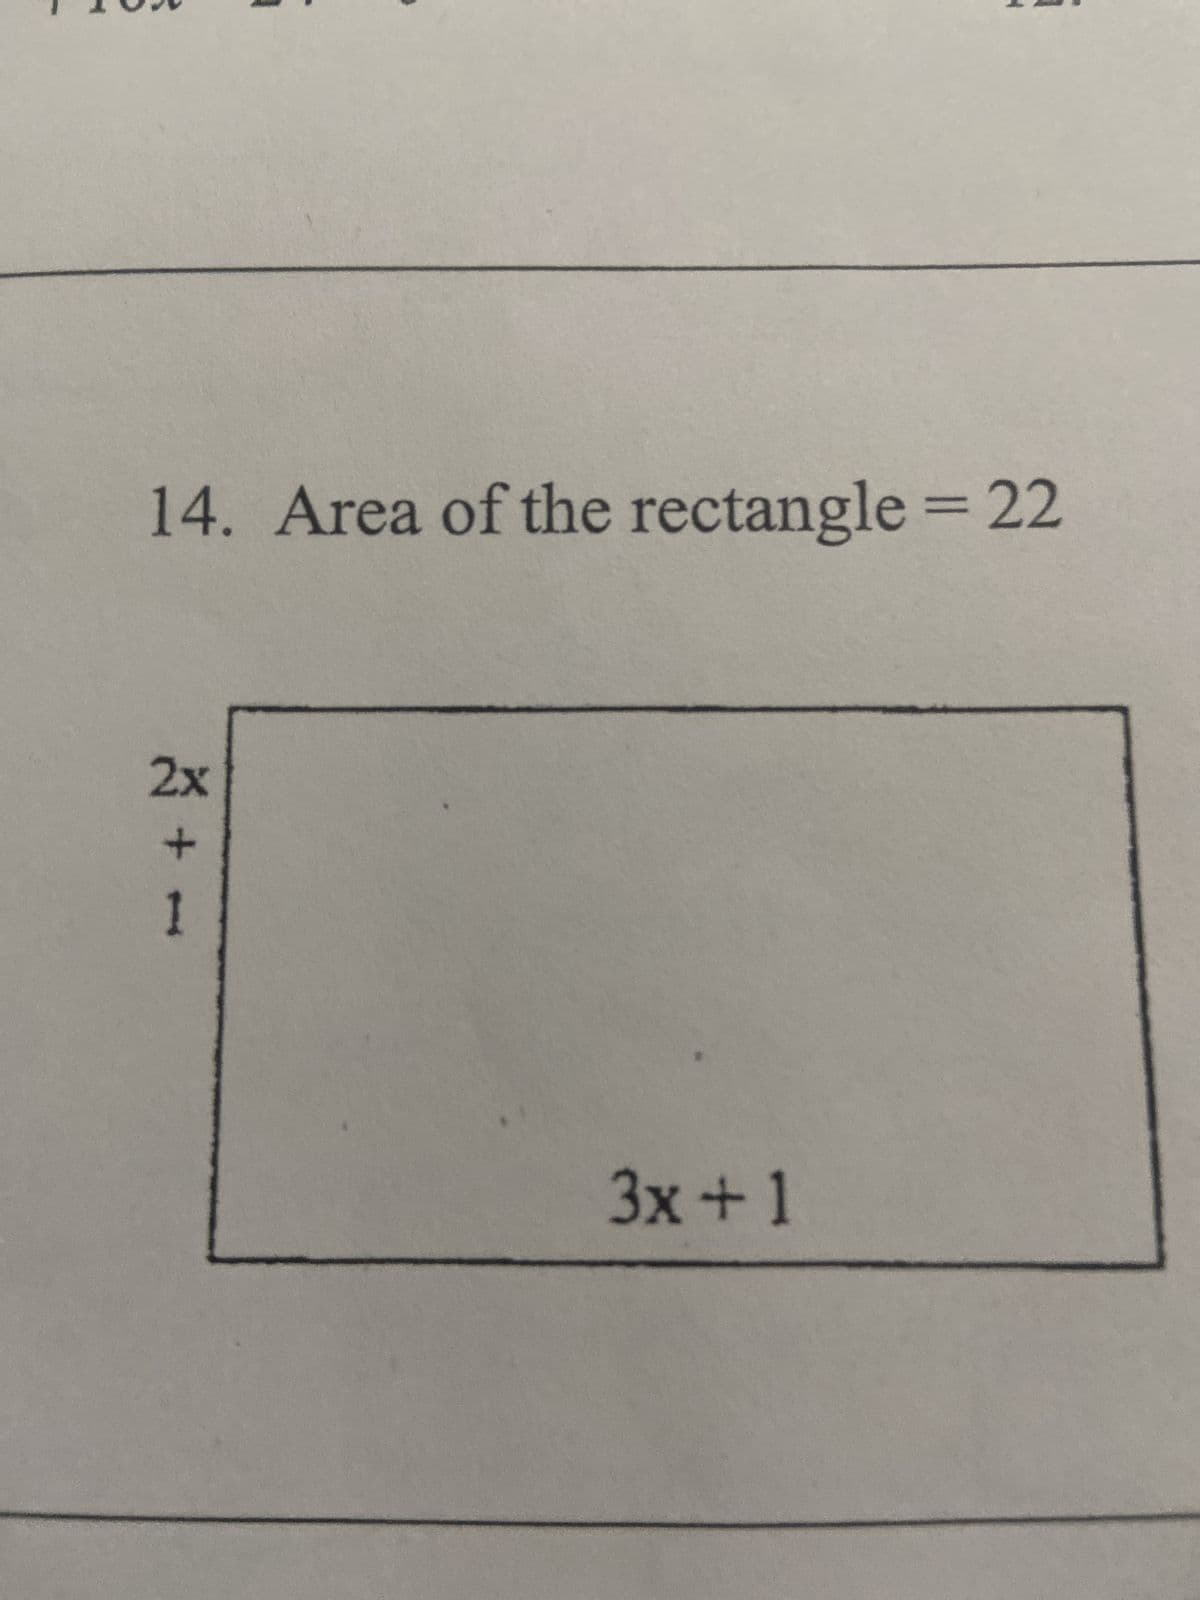 14. Area of the rectangle = 22
2x
+
1
į
3x + 1